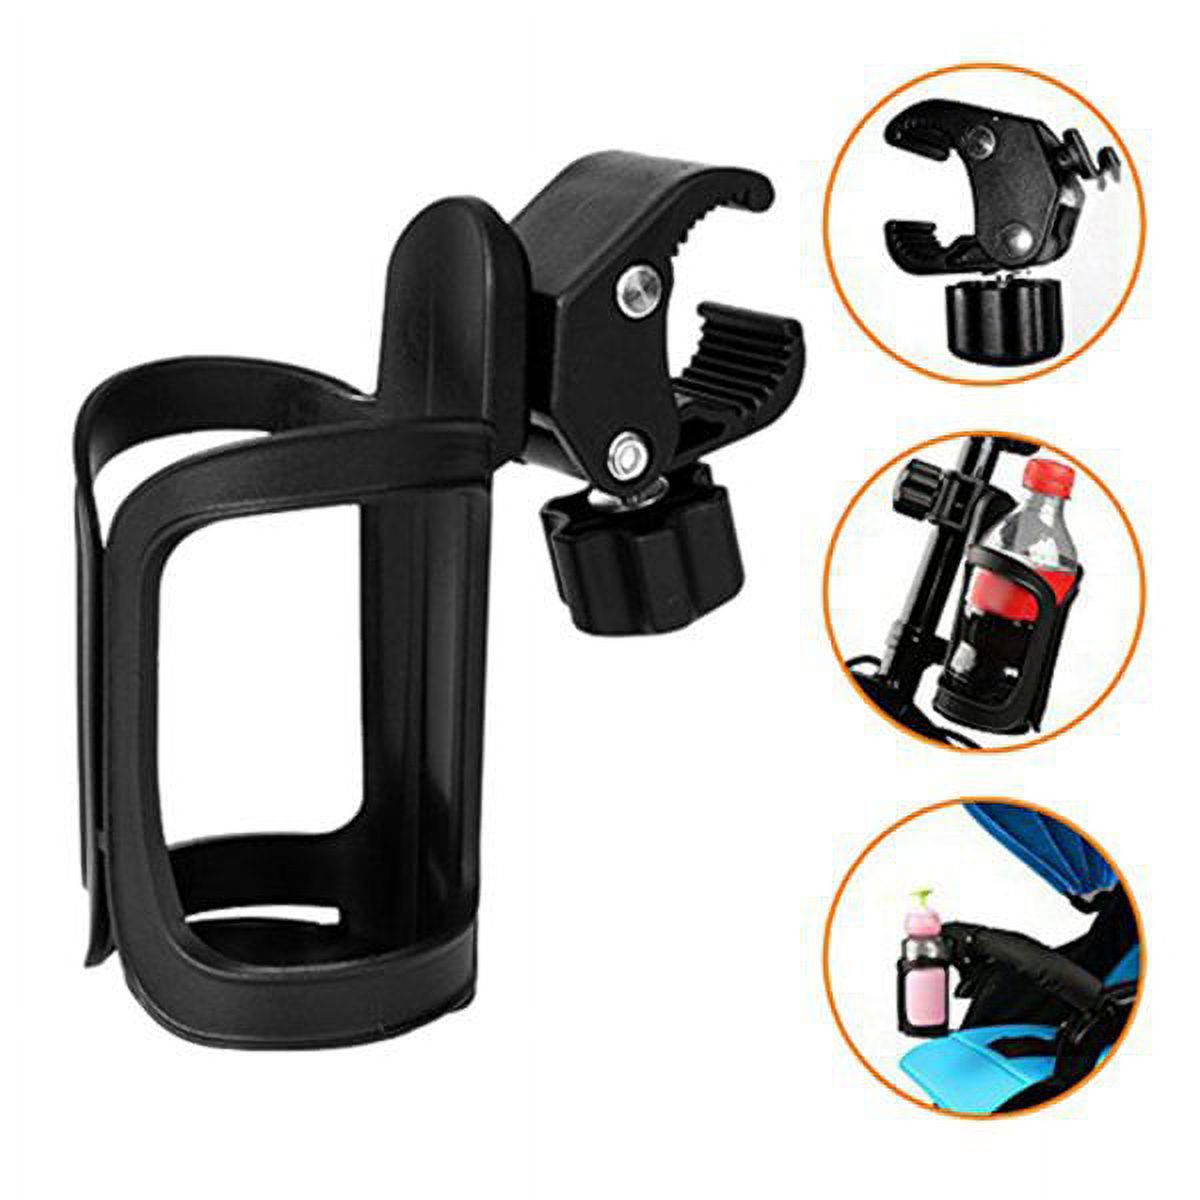 LNKOO Bike & Motorcycle Water Bottle Holder No Screws Adjustable Bicycle Handlebar Mount Cup Cage Compatible with 60-80mm Water Cup Bicycle Water Toughness Road Cycling Bottle Holder - image 1 of 8